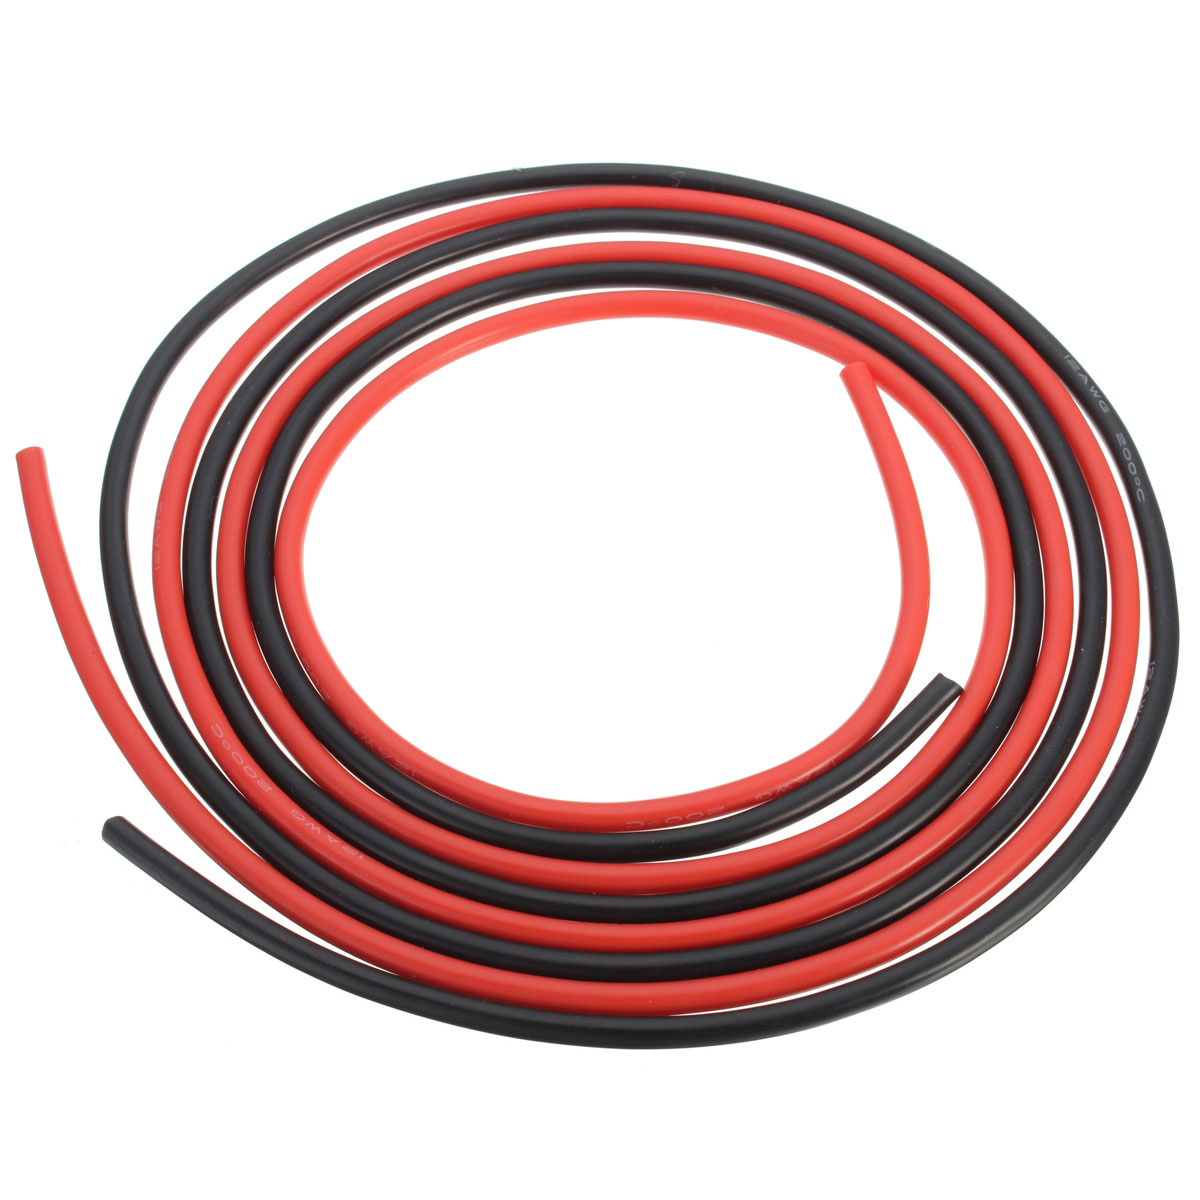 12AWG-3m-Gauge-Silicone-Wire-Flexible-Stranded-BlackRed-Copper-Cable-F-RC-983012-3